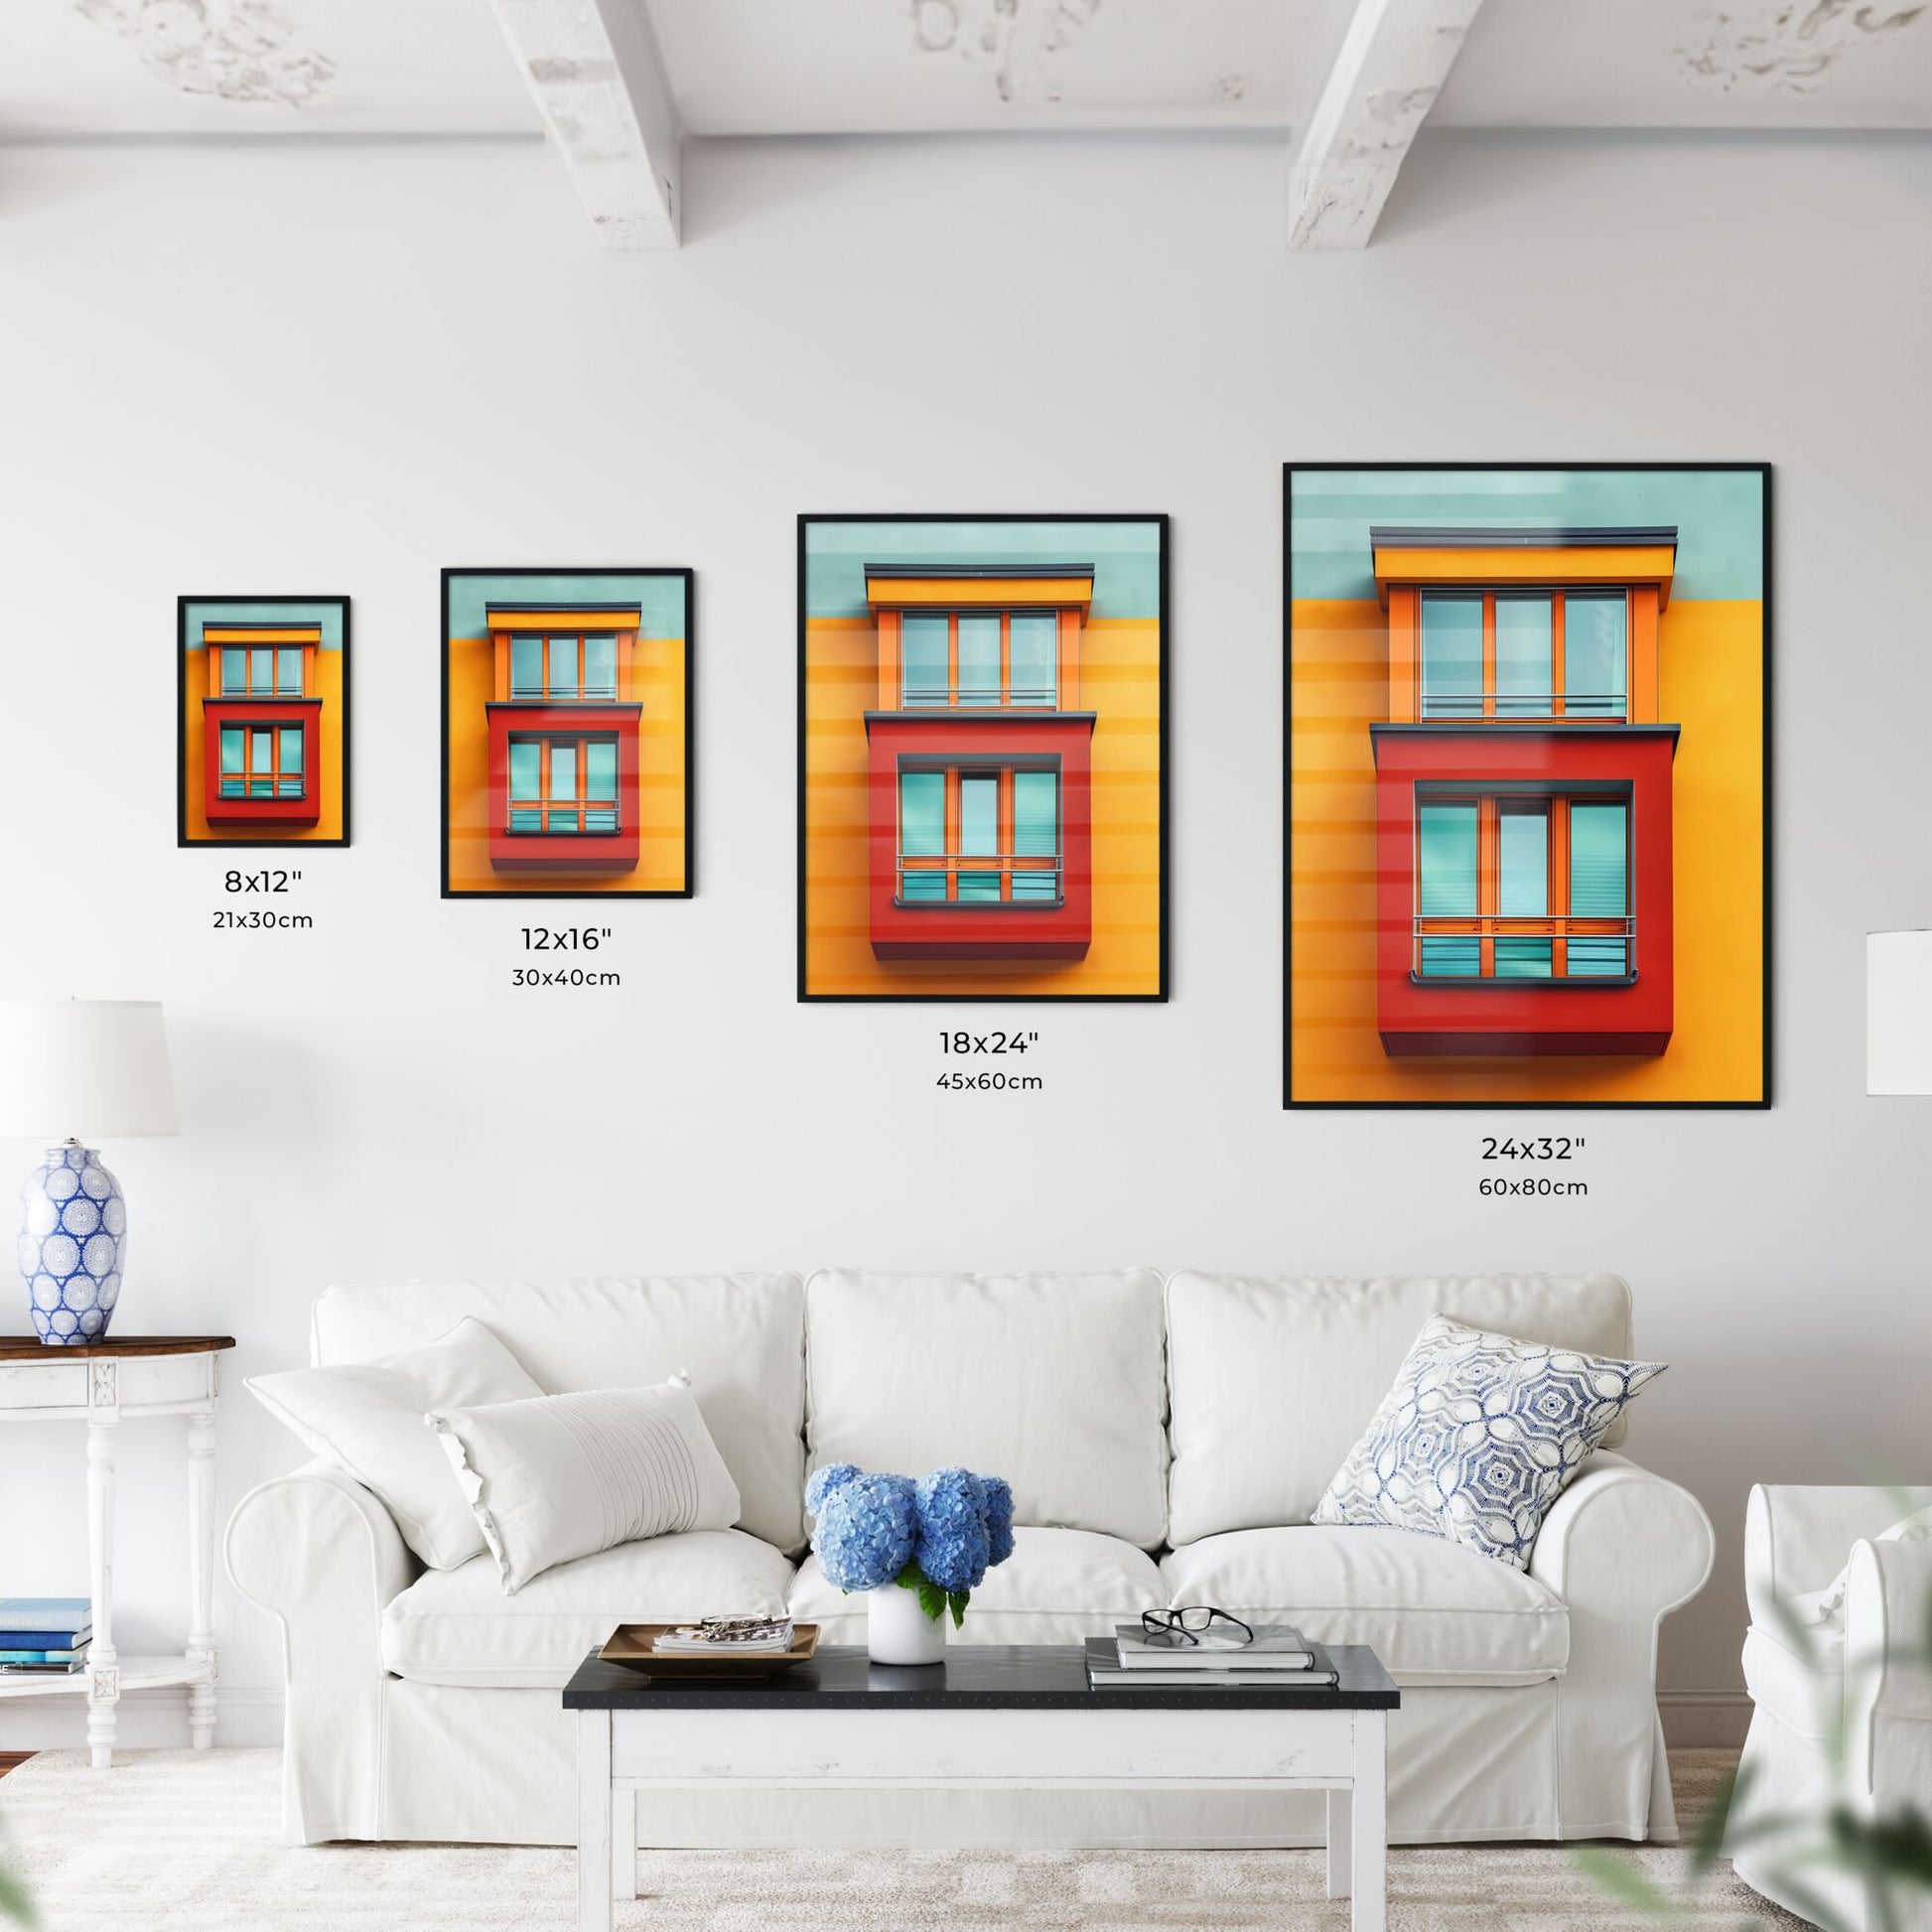 Vibrant Bauhaus Building Painting with Balcony, Geometric Abstract Art Poster in Minimalist Style Default Title